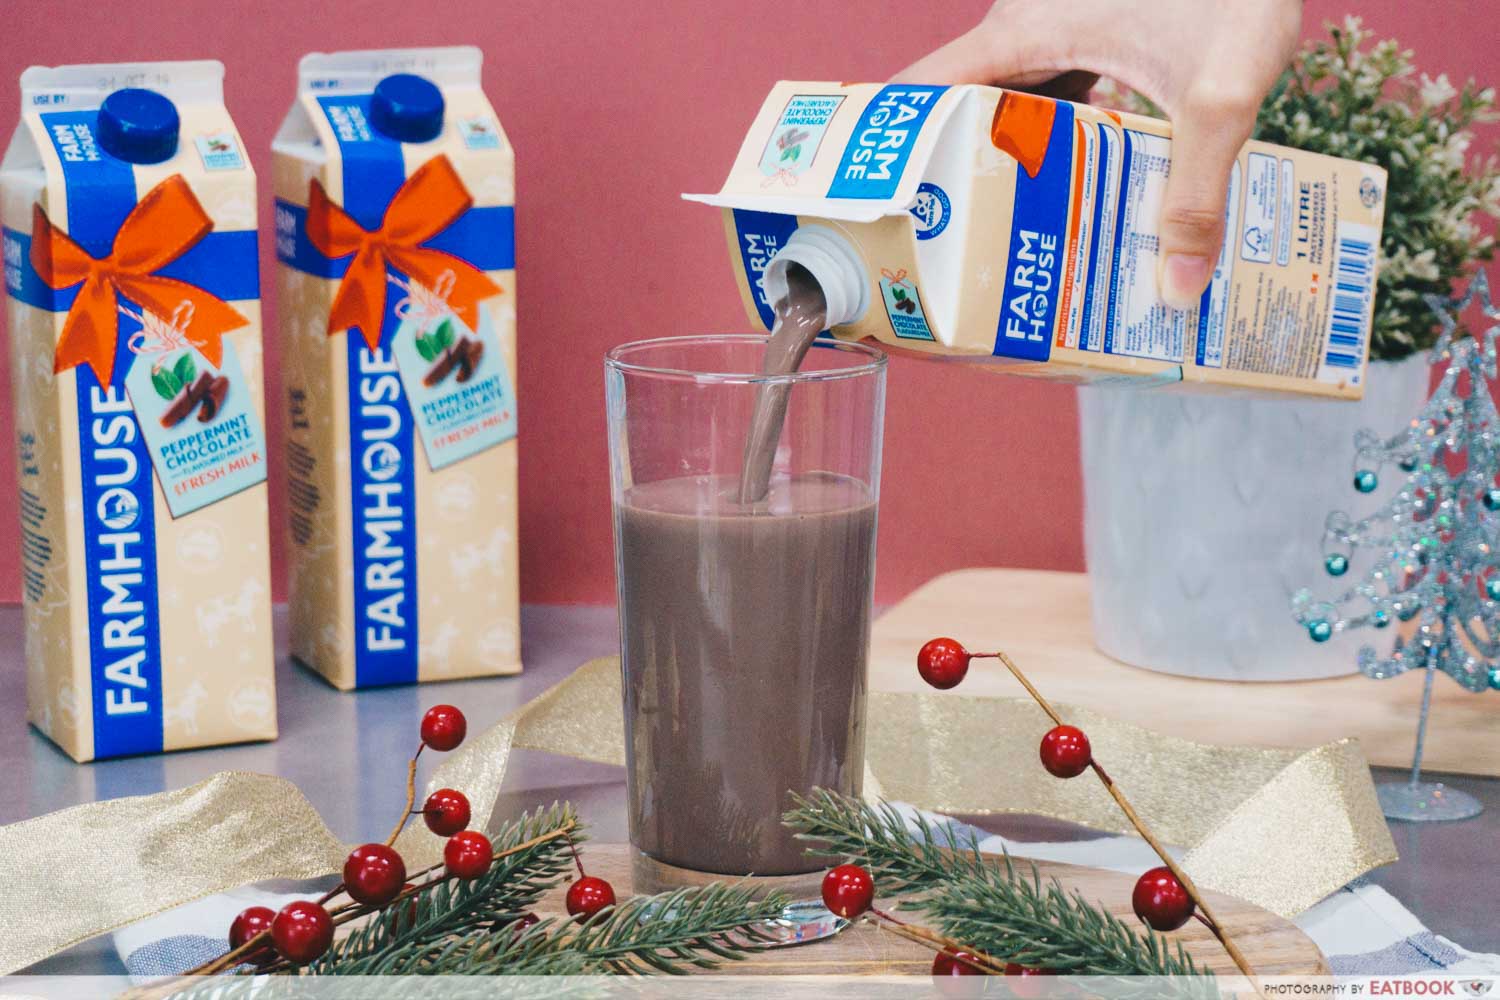 Farmhouse Rolls Out Limited Edition Peppermint Chocolate Milk For Christmas